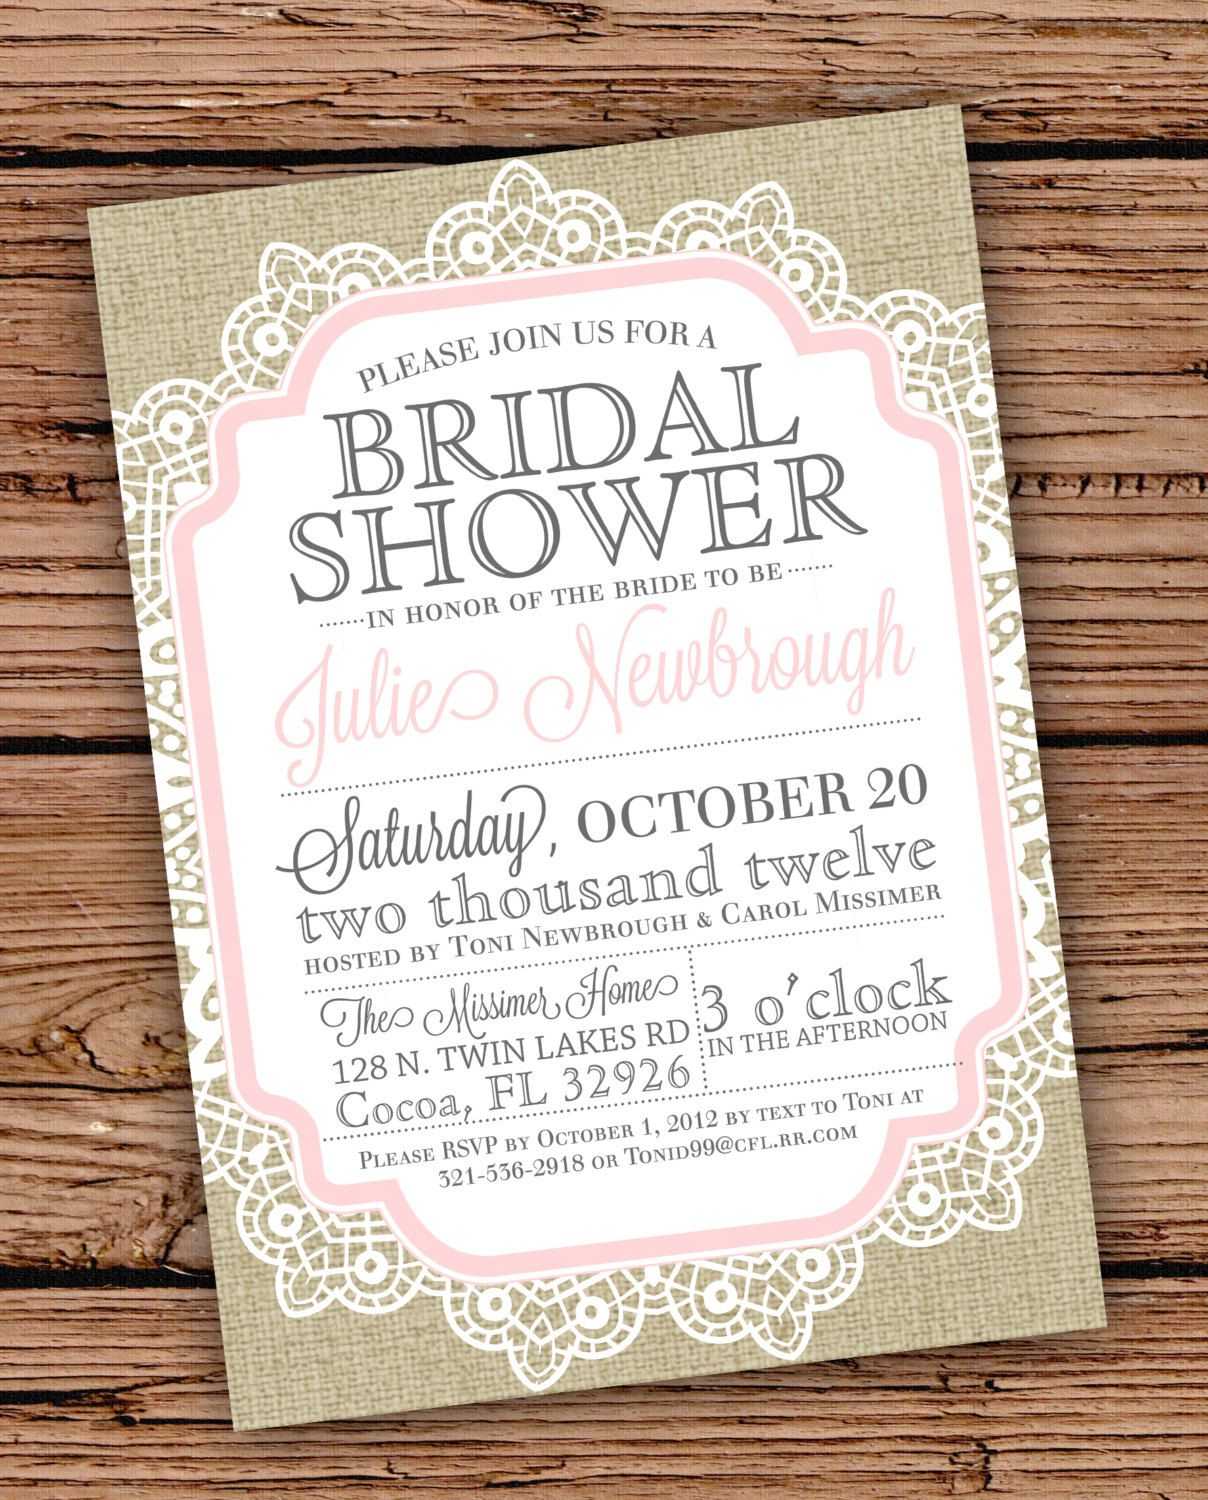 Diy Wedding Shower Invitations : Diy Bridal Shower Intended For Michaels Place Card Template